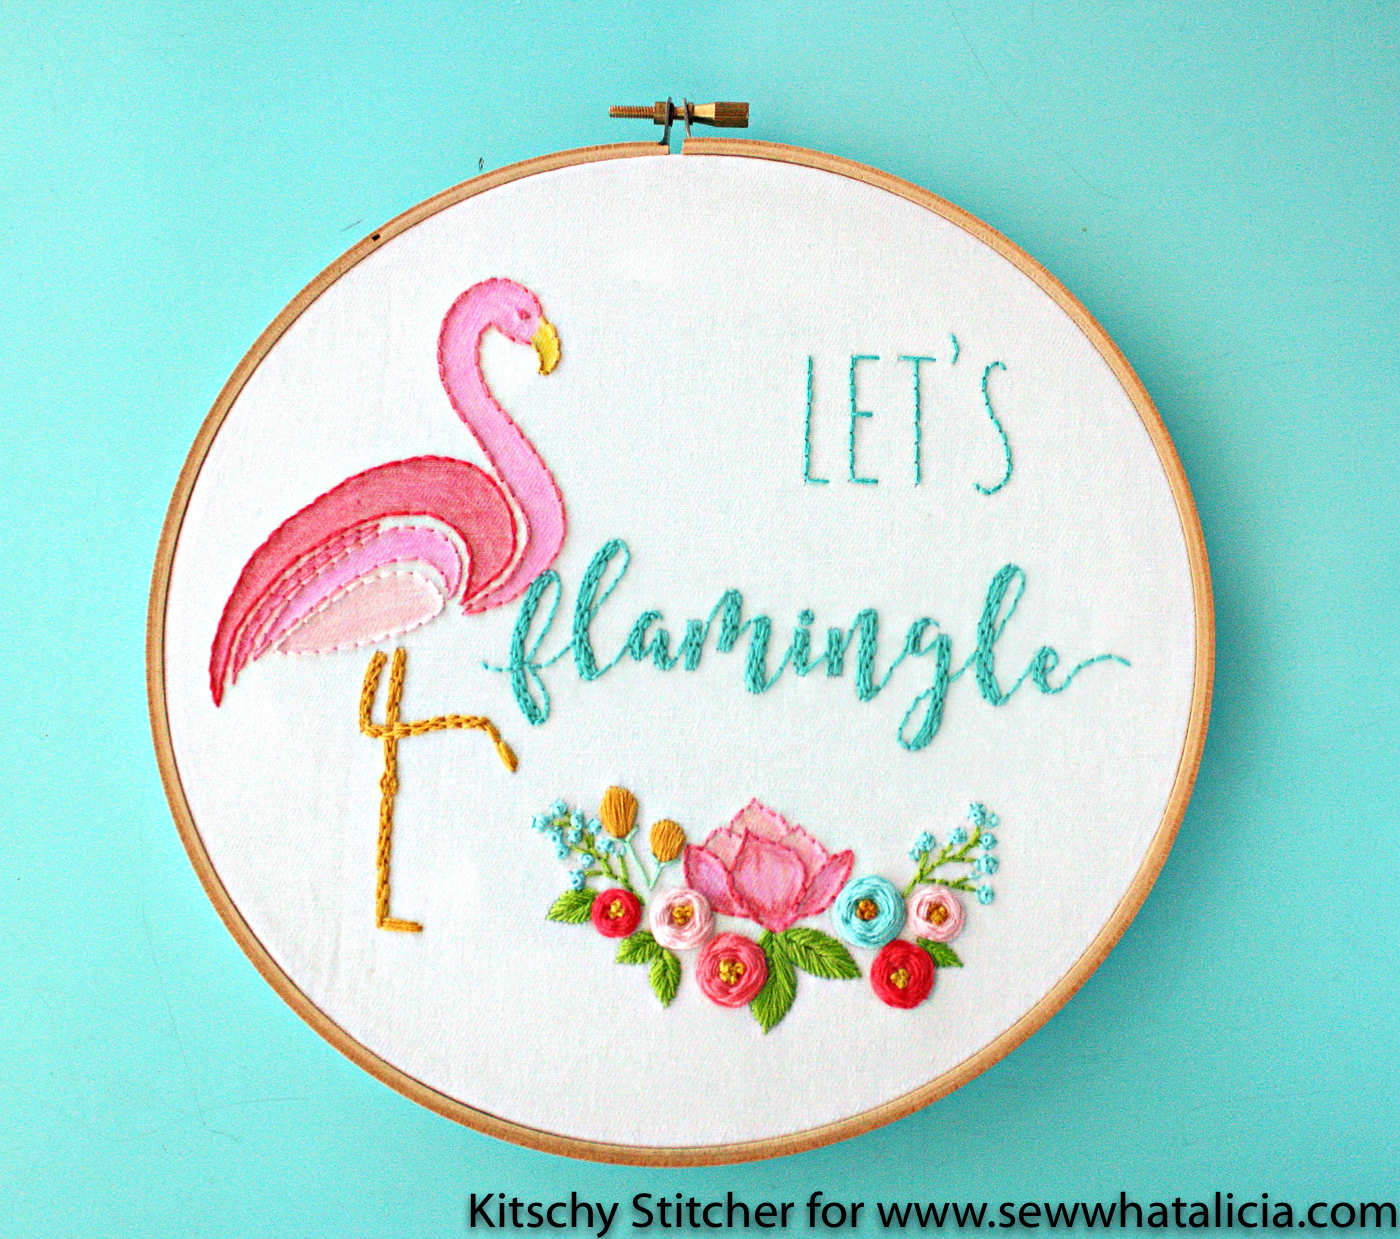 Embroidery How to with the Kitschy Stitcher: This is an amazing embroidery tutorial from the Kitschy Stitcher. Learn to make a cute flamingo pattern. Click through for the free pattern. | www.sewwhatalicia.com